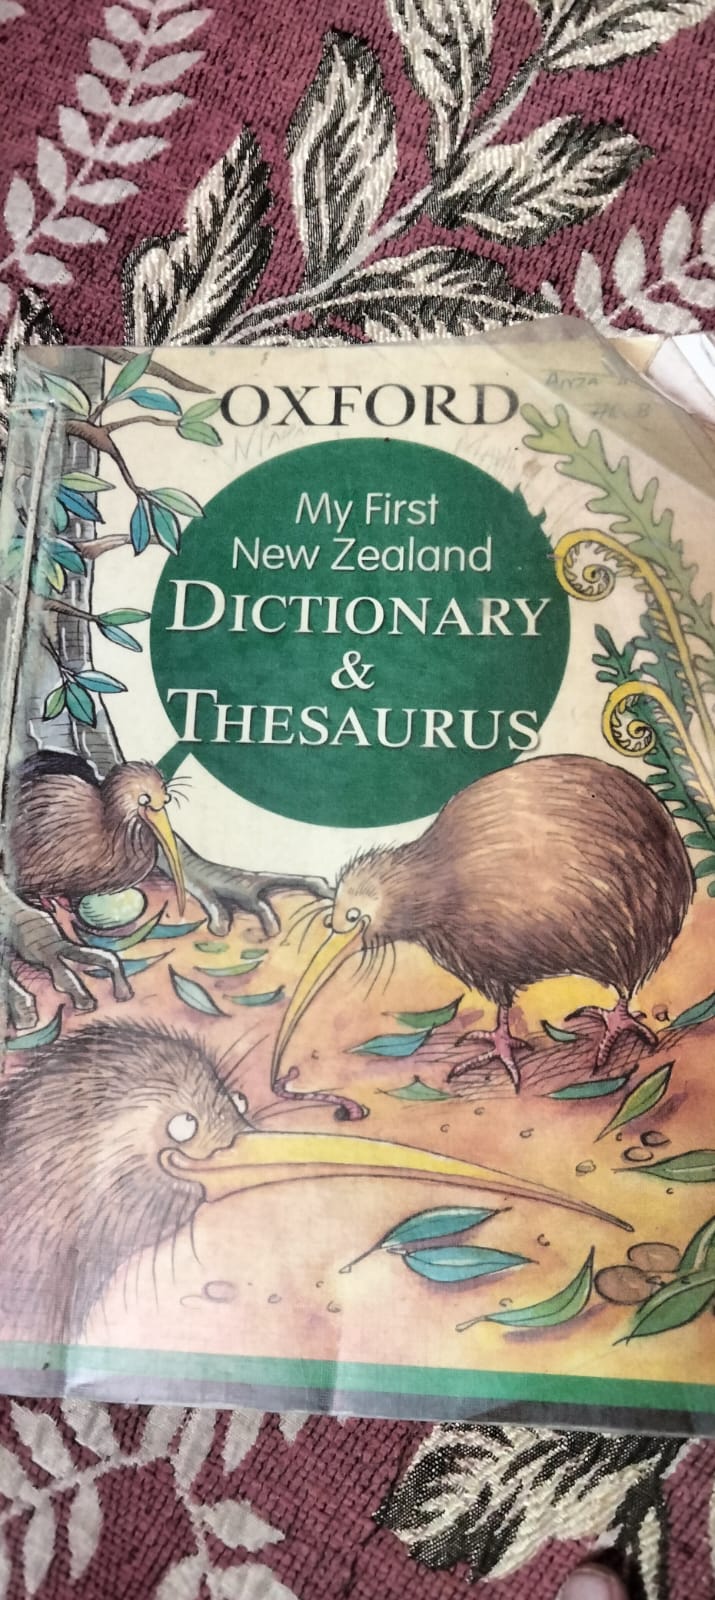 My First New Zealand Dictionary and Thesaurus